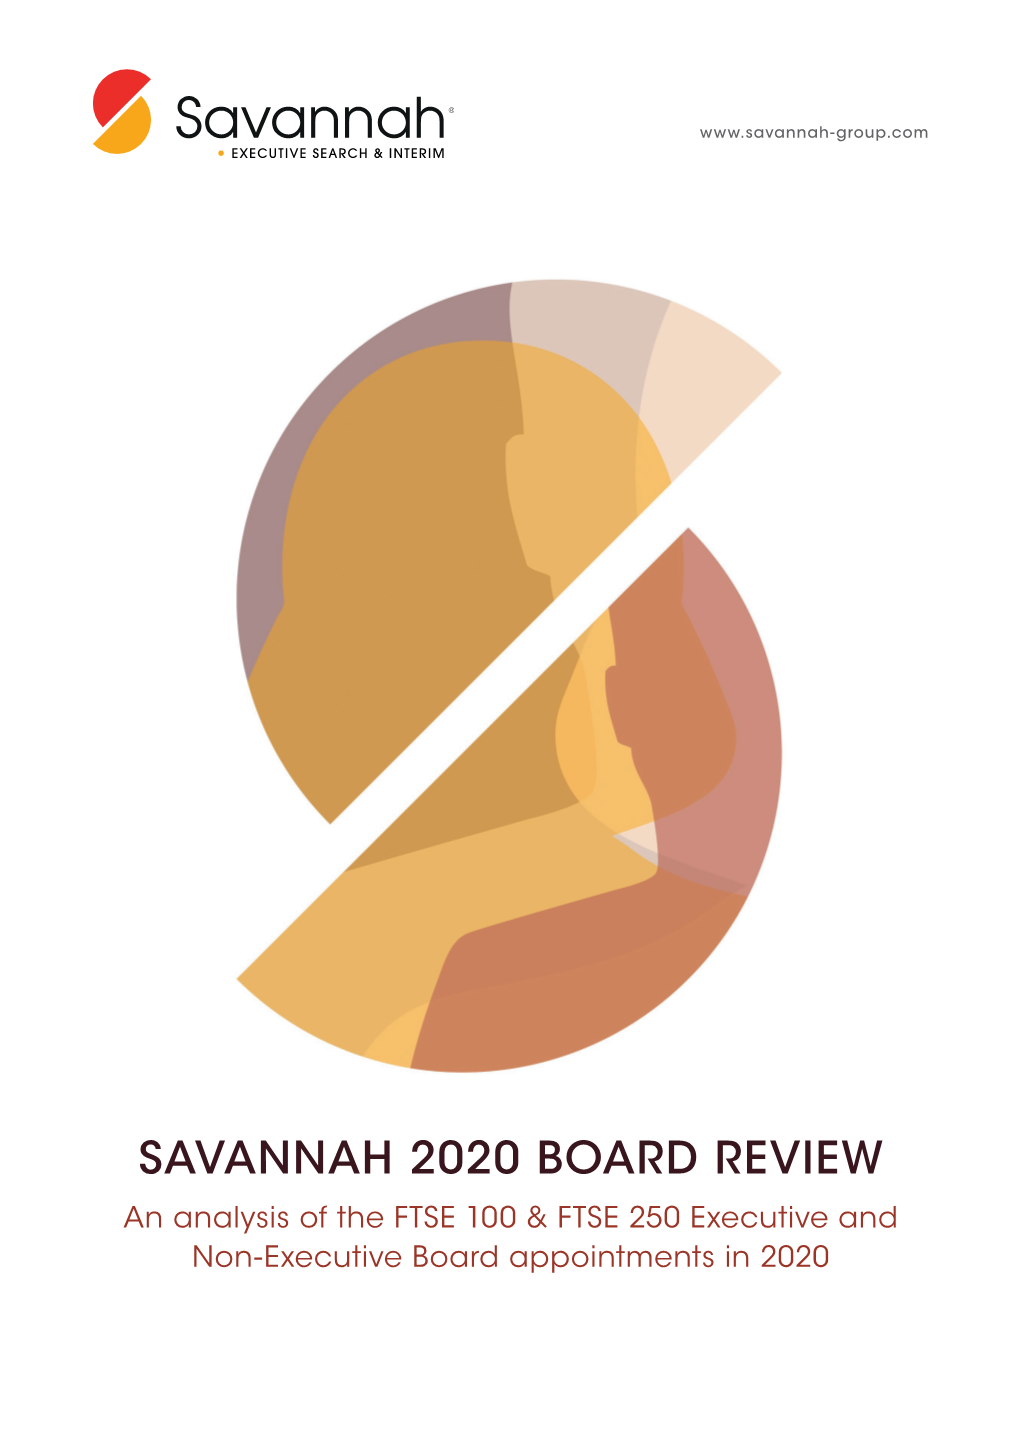 SAVANNAH 2020 BOARD REVIEW an Analysis of the FTSE 100 & FTSE 250 Executive and Non-Executive Board Appointments in 2020 INTRODUCTION